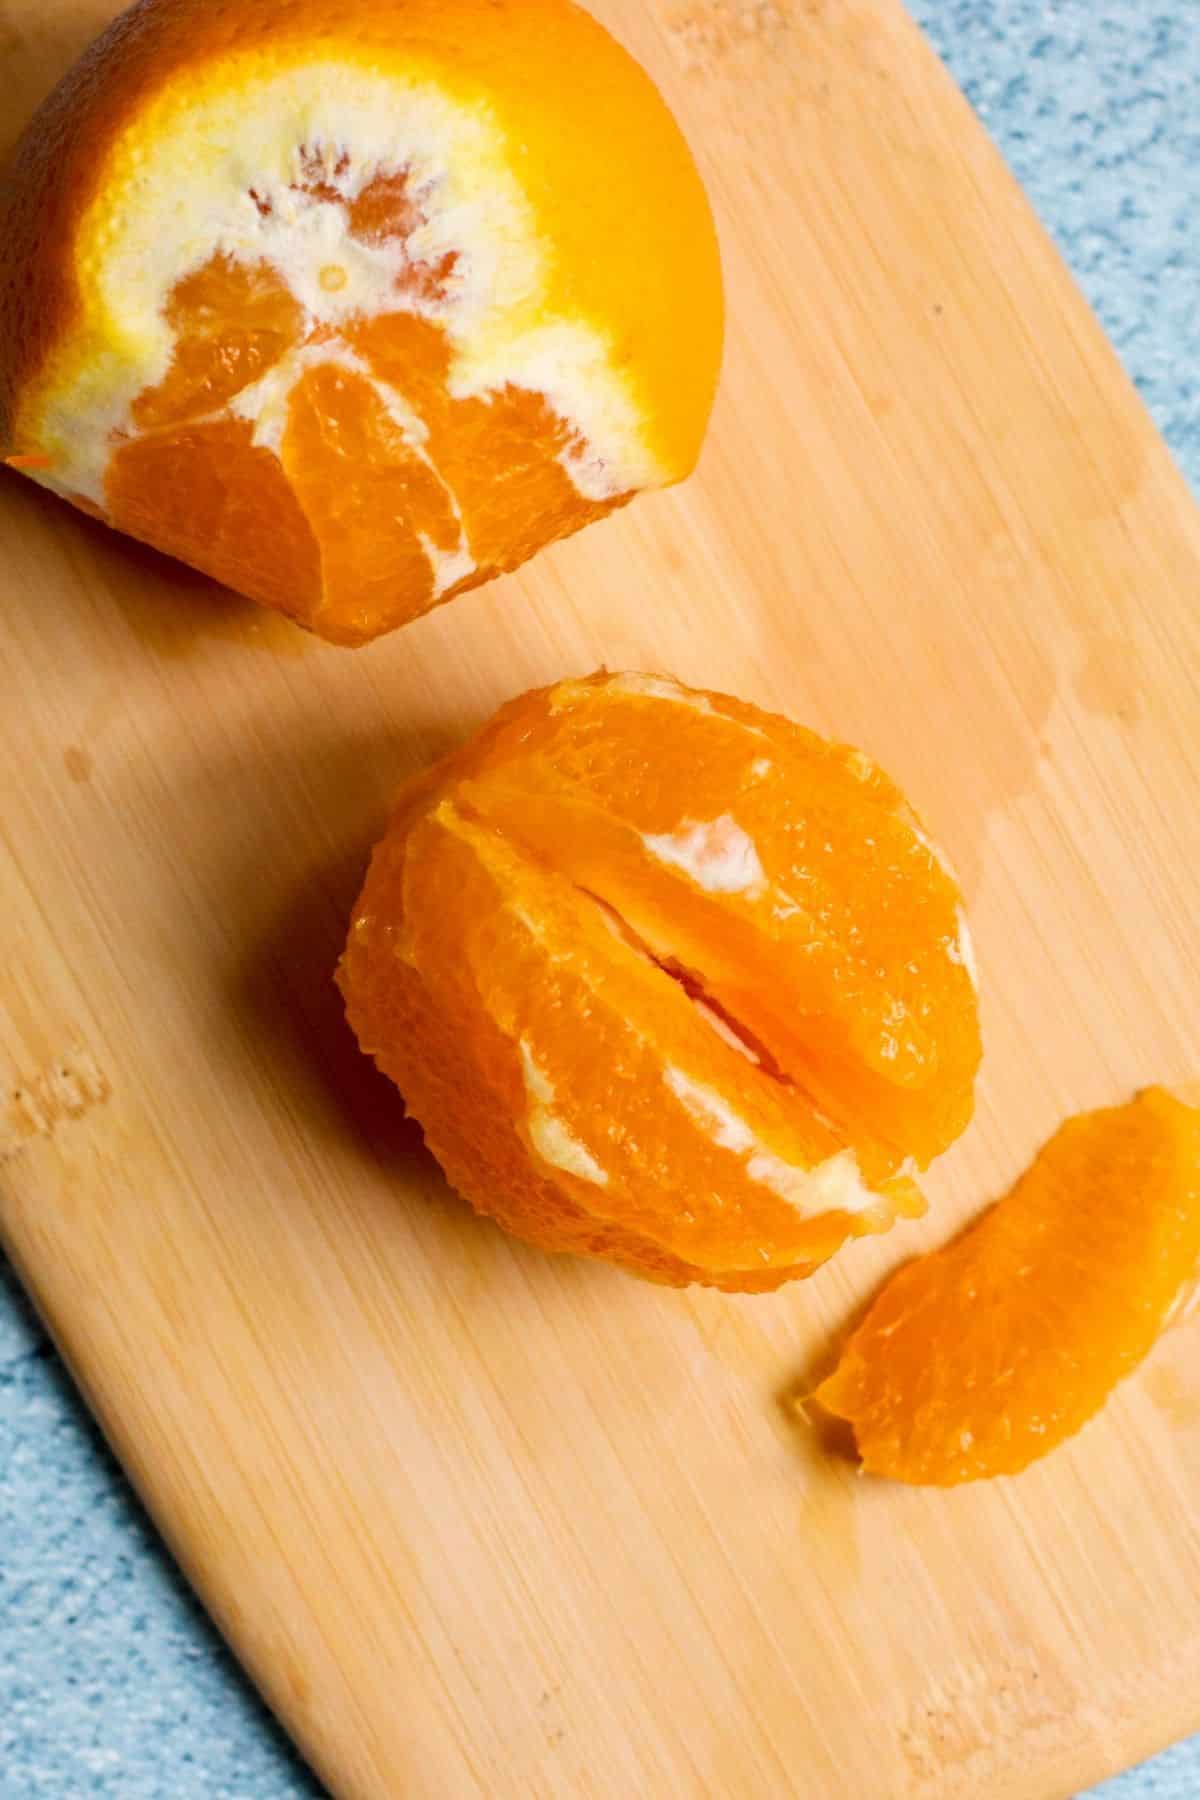 Image showing how to cut an orange into segments